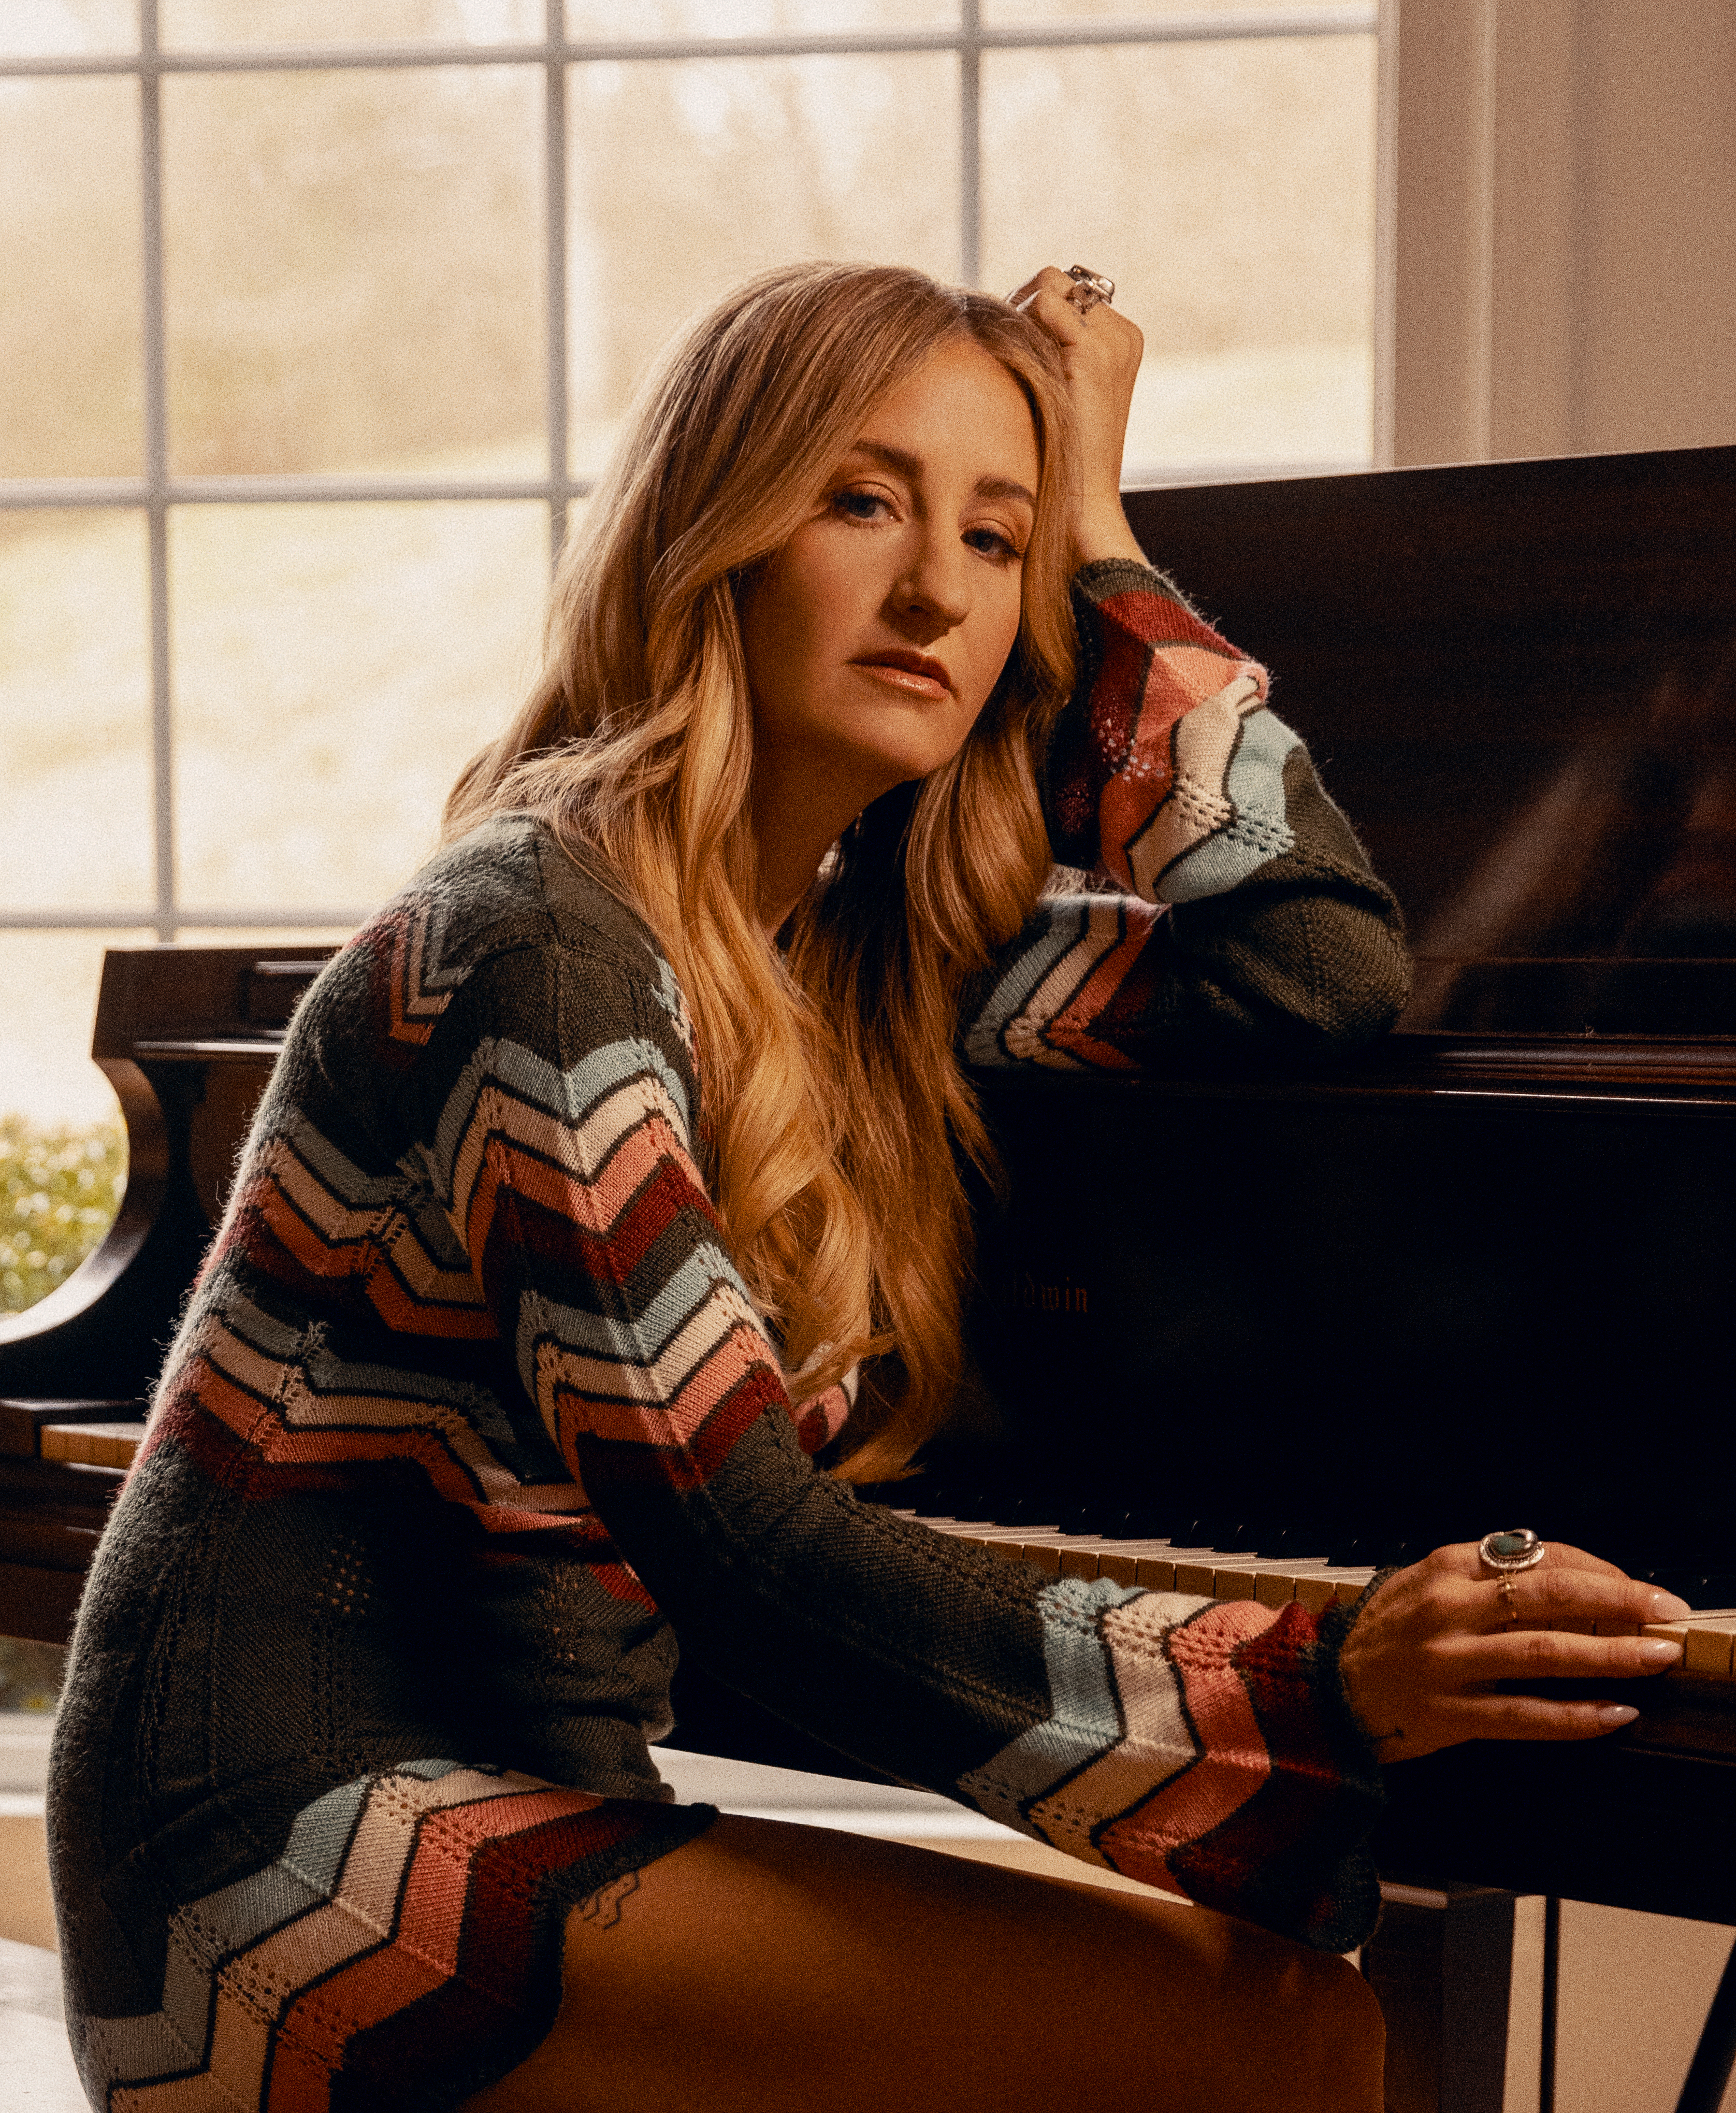 Seated at a piano, Margo Price looks toward the camera